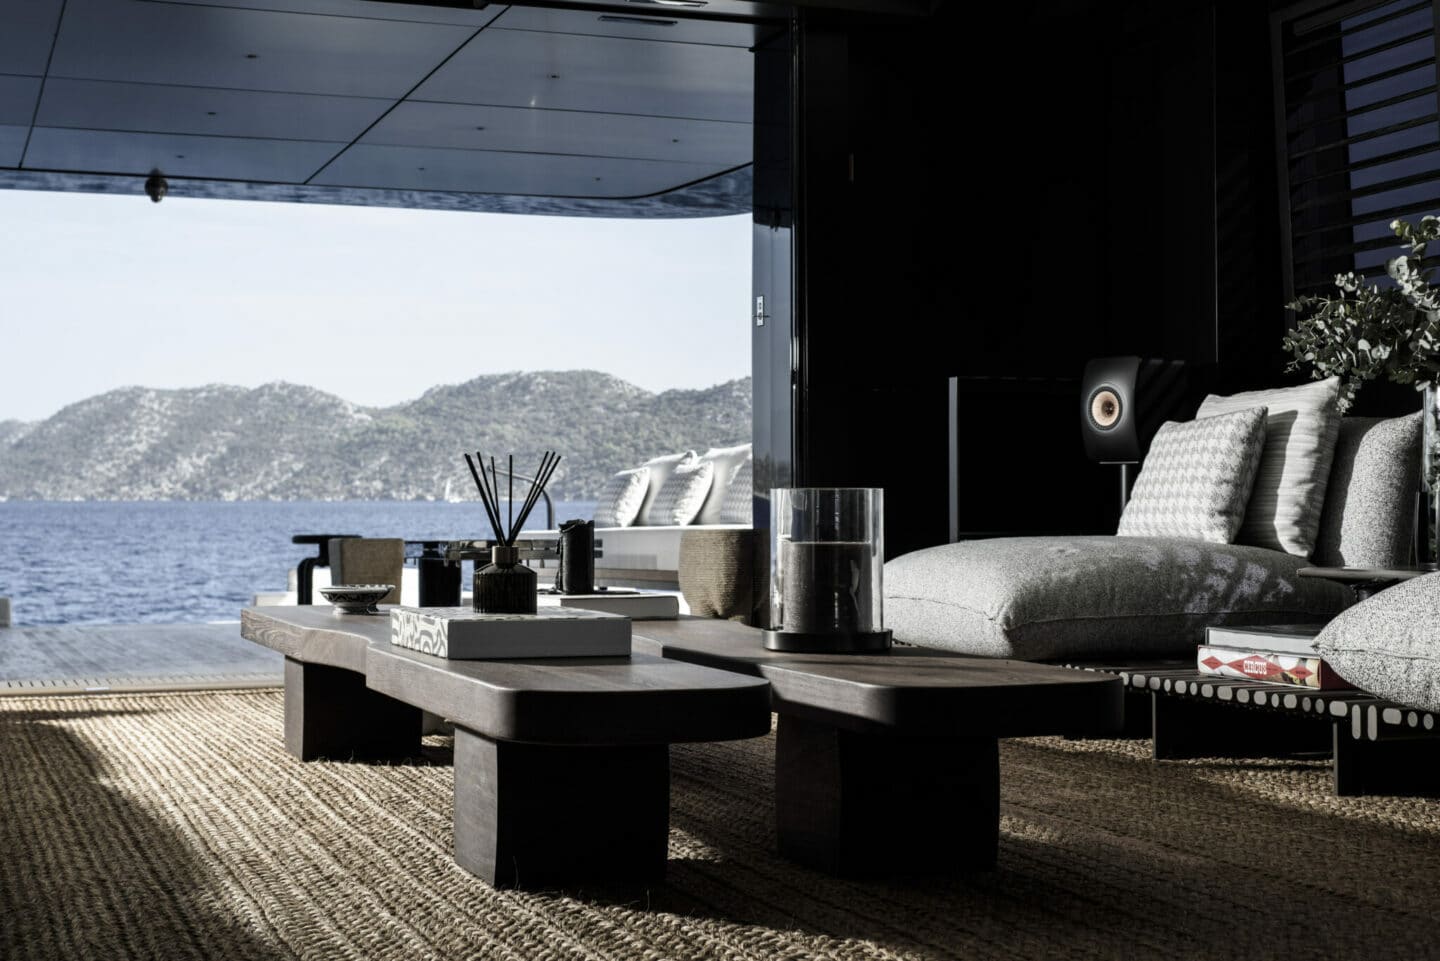 Superyacht lounge with sofa, dinning table and expensive decor with view out to sea